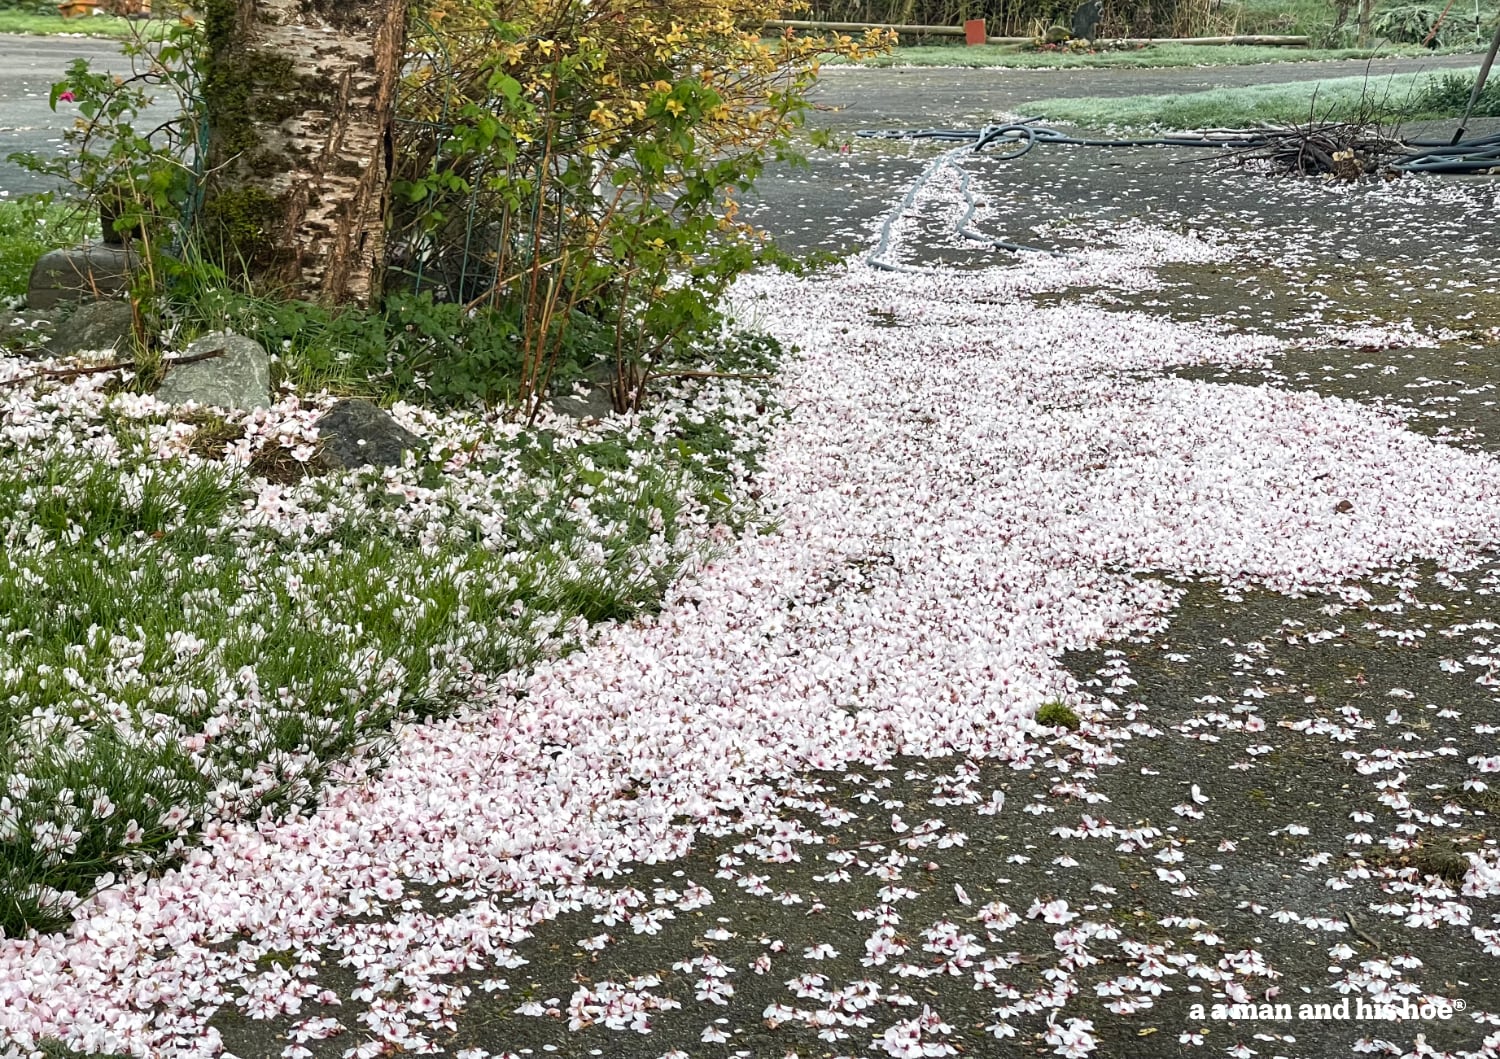 Fallen cherry blossoms form a river underneath the tree.